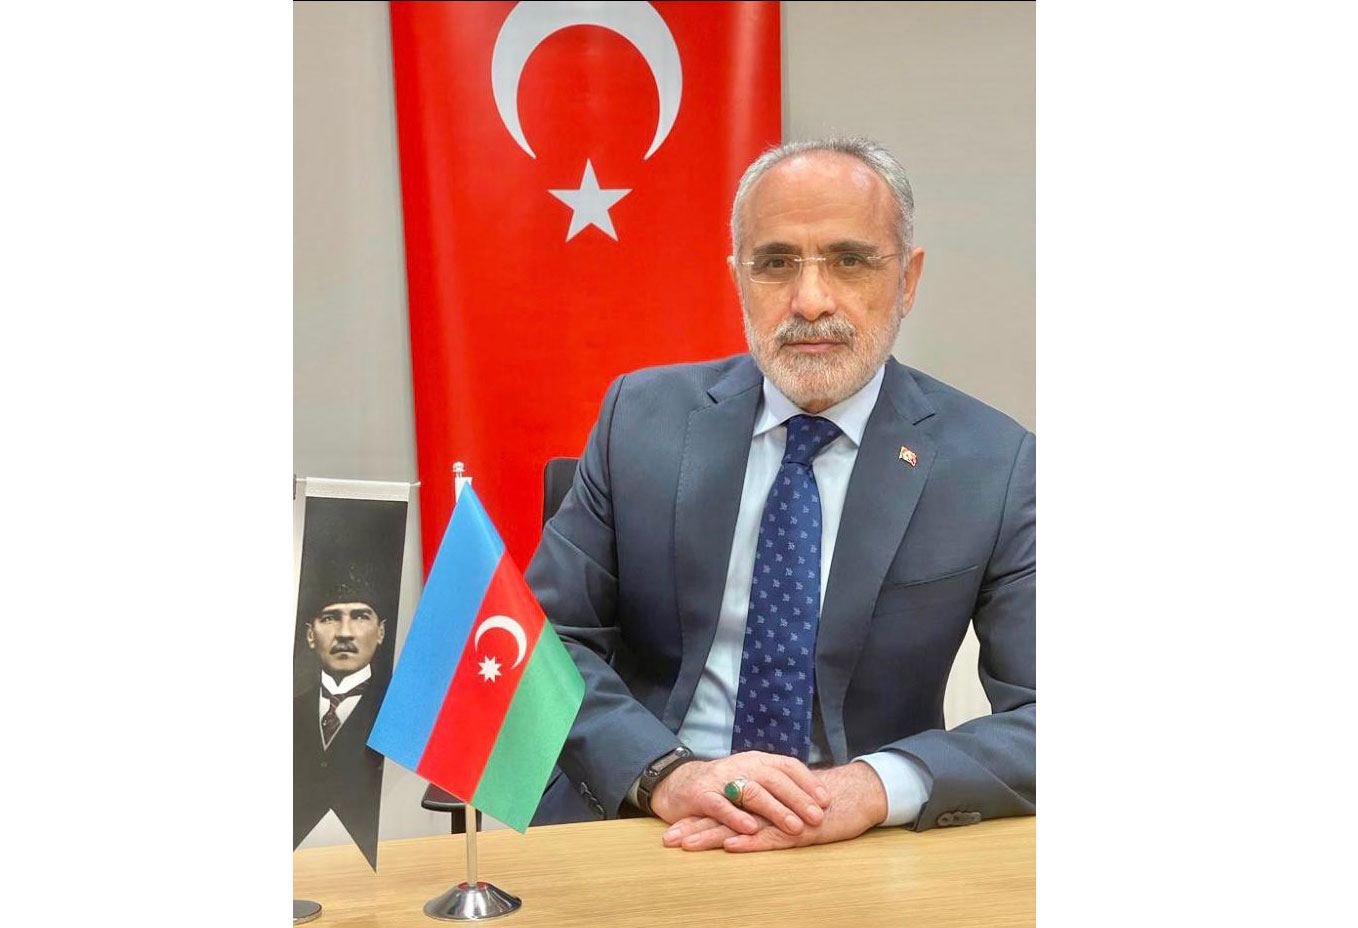 Victory of heroic Azerbaijani army and leadership of President Ilham Aliyev will forever be remembered by entire Turkic world - adviser to Turkish president